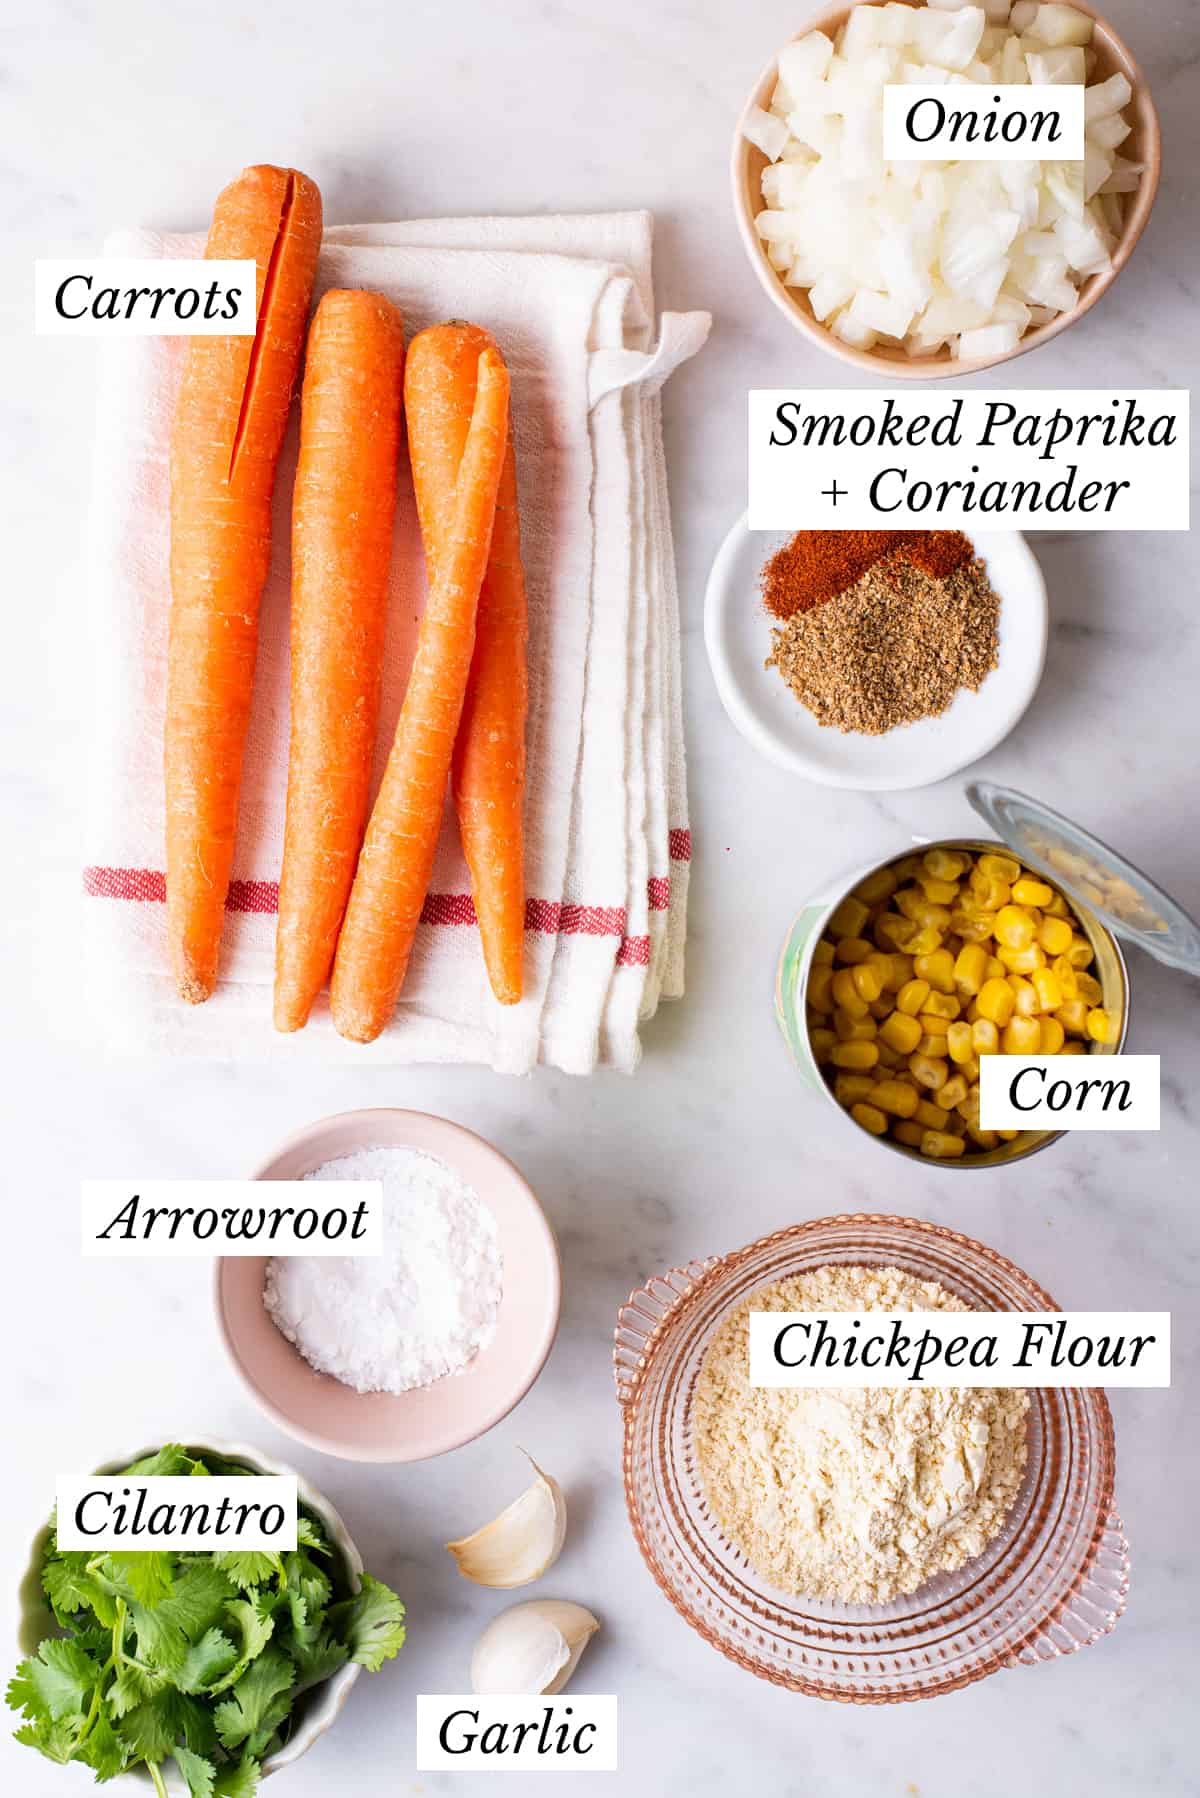 Ingredients gathered to make carrot corn fritters on a marble table.